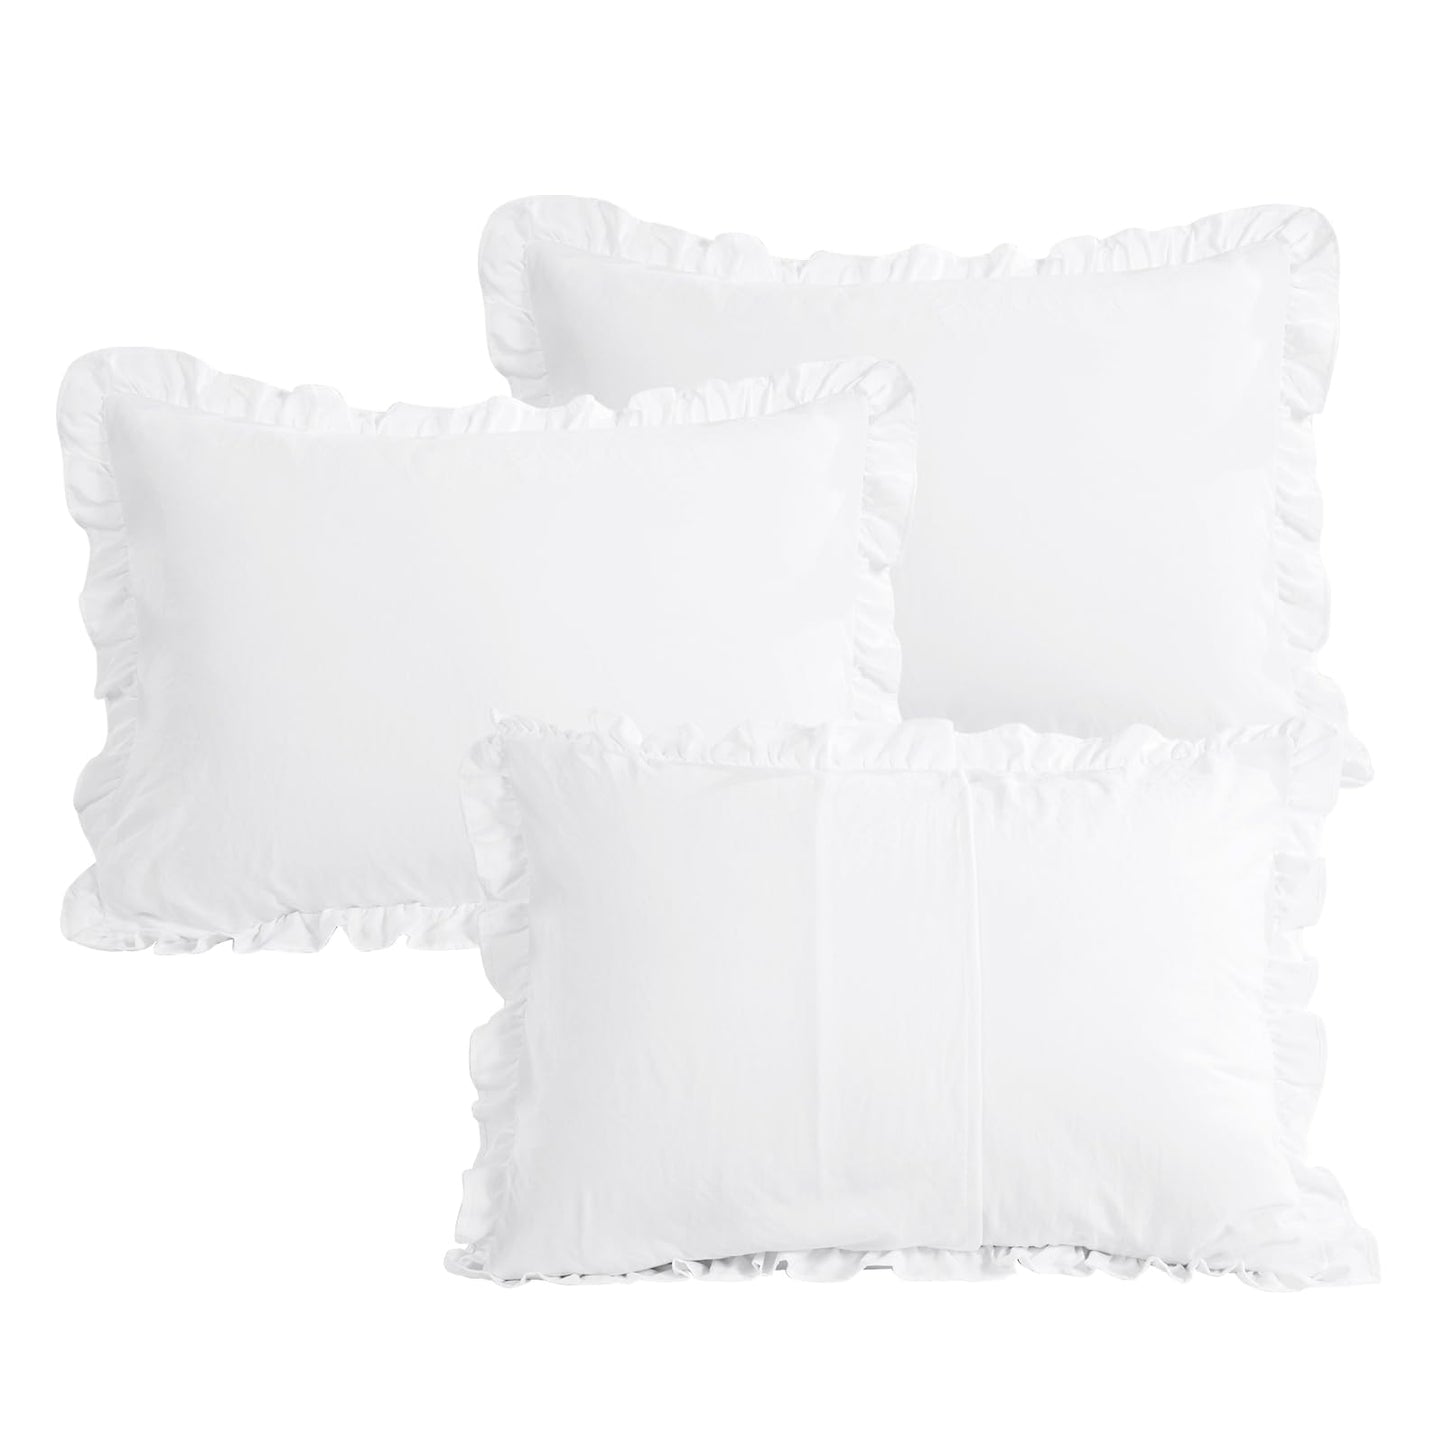 HOMBYS 5 Pieces Thicker Ruffled Daybed Set Twin Size, Daybed Comforter Set for All Season Cozy and Soft, Daybed Cover Fluffy Comforter with Bed Skirt and Shams - 75 x39 - Pure White